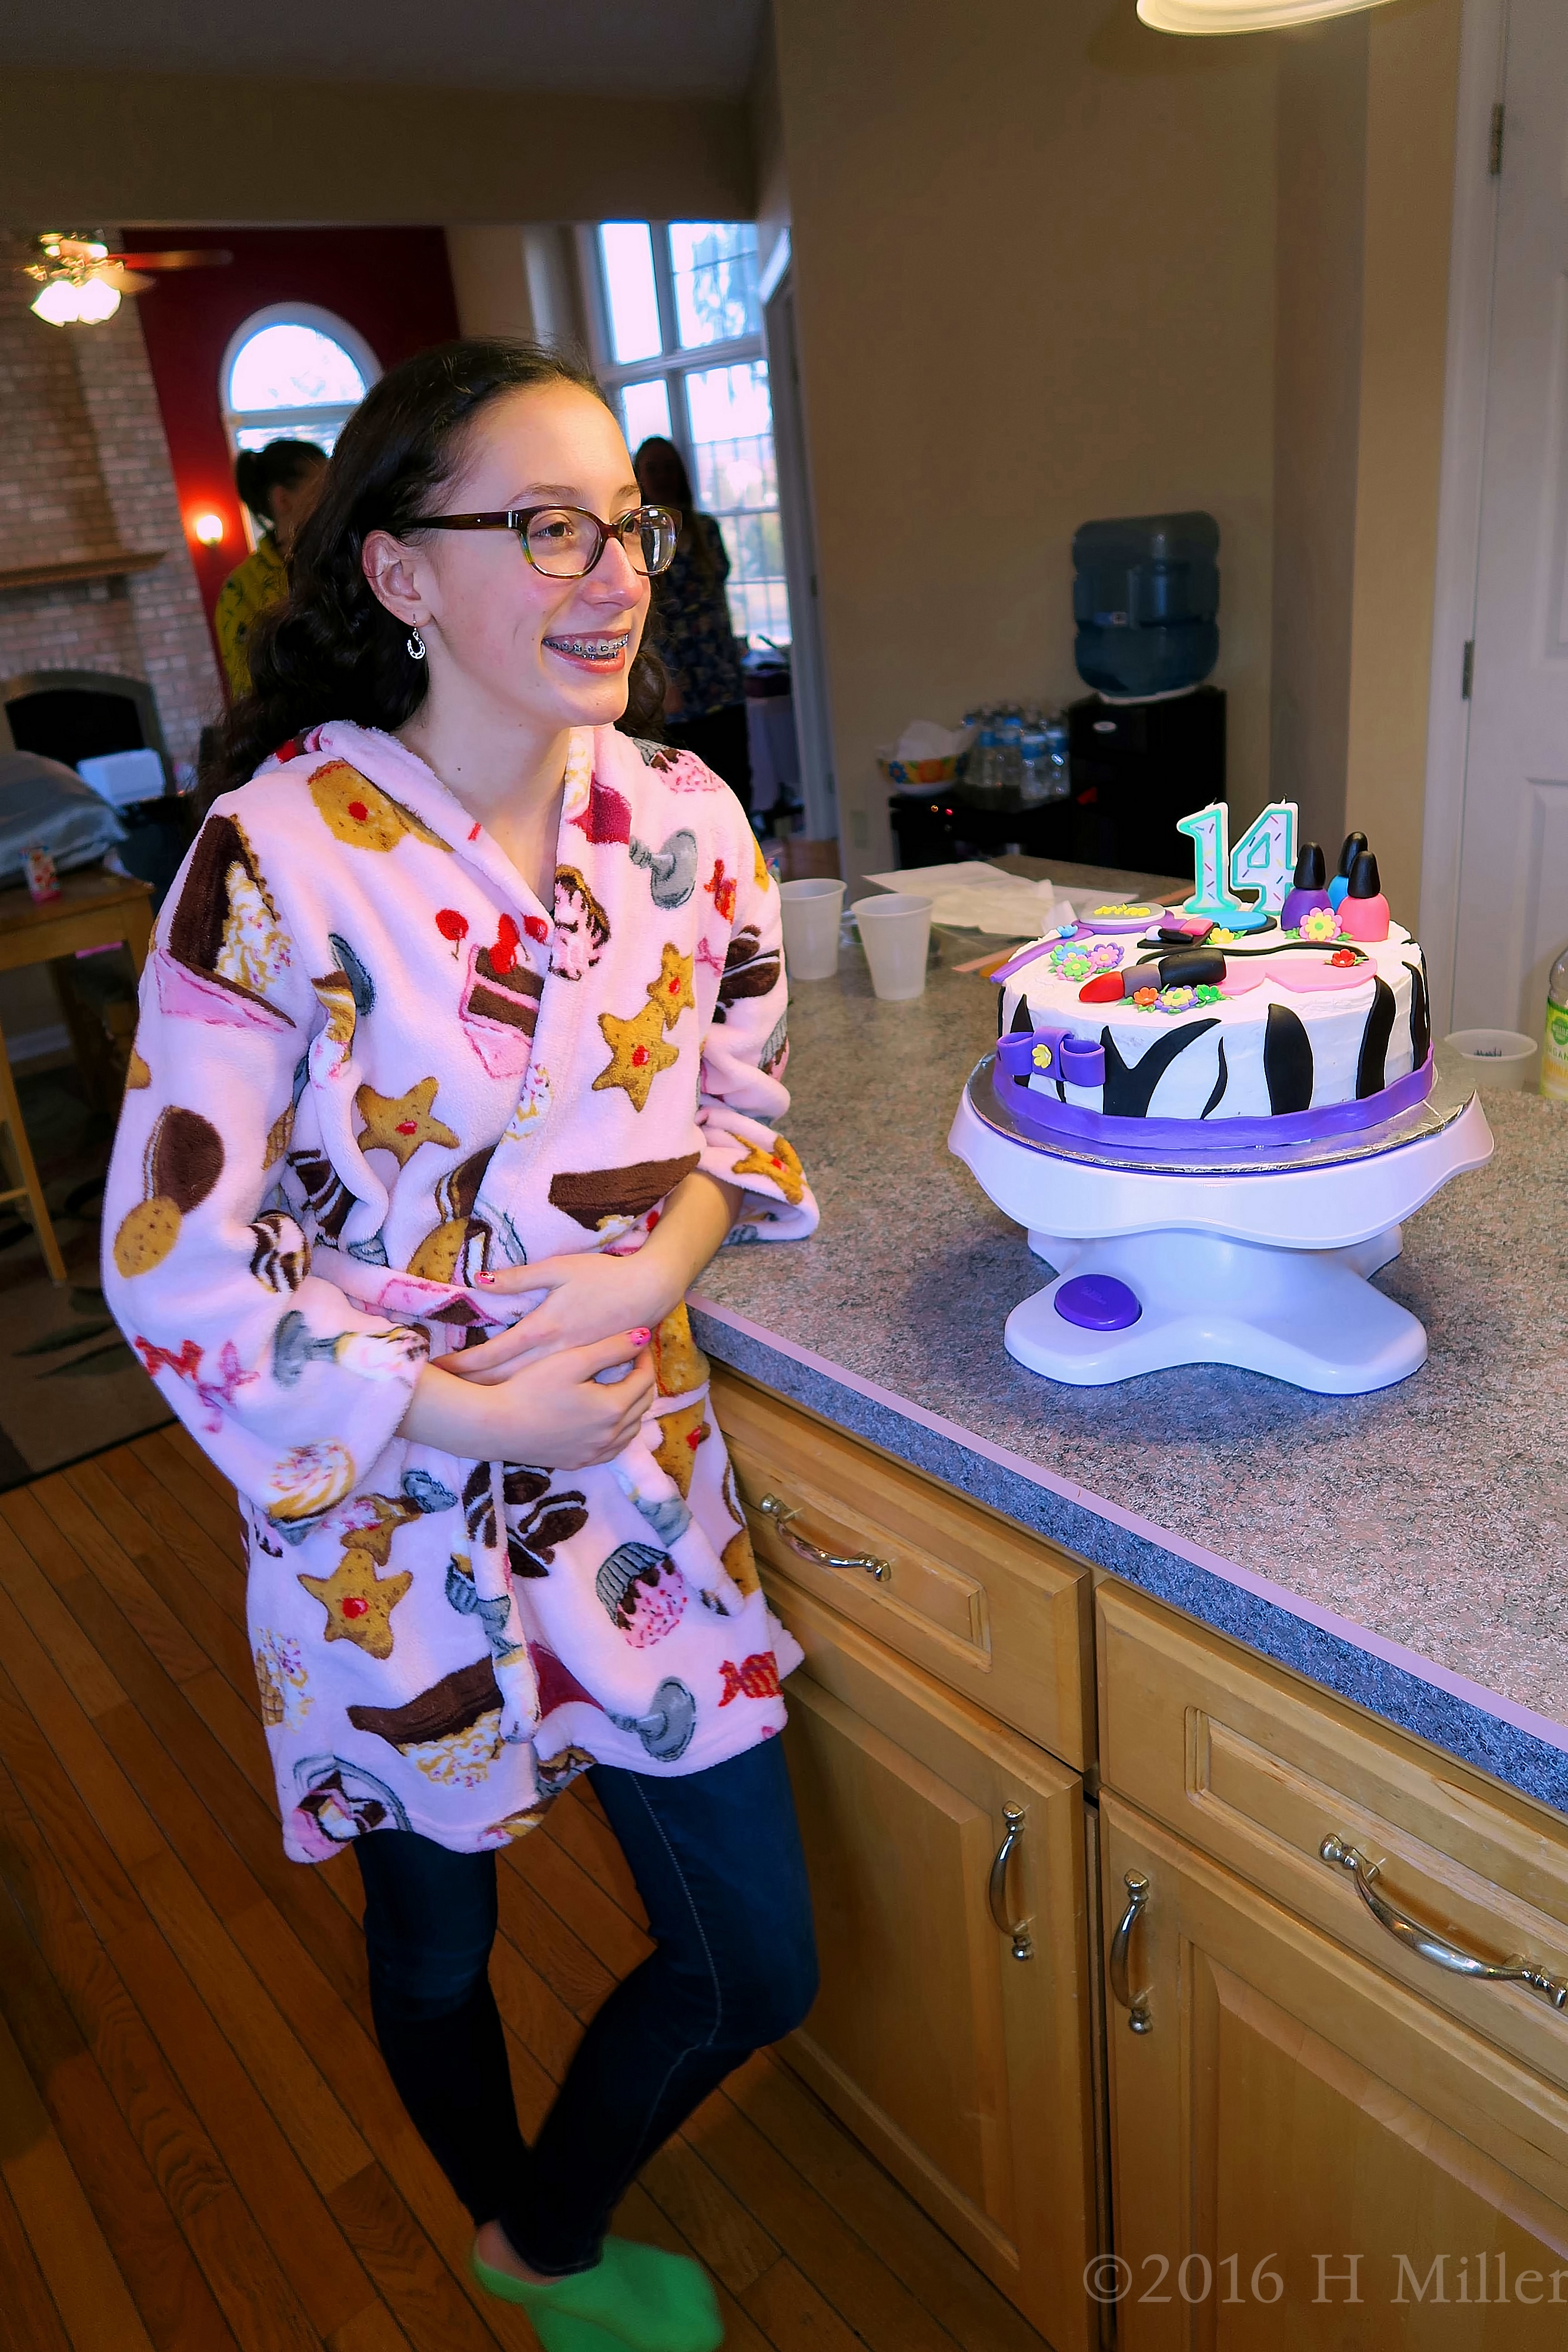 Kimmy And Her Spa Themed Birthday Cake! 